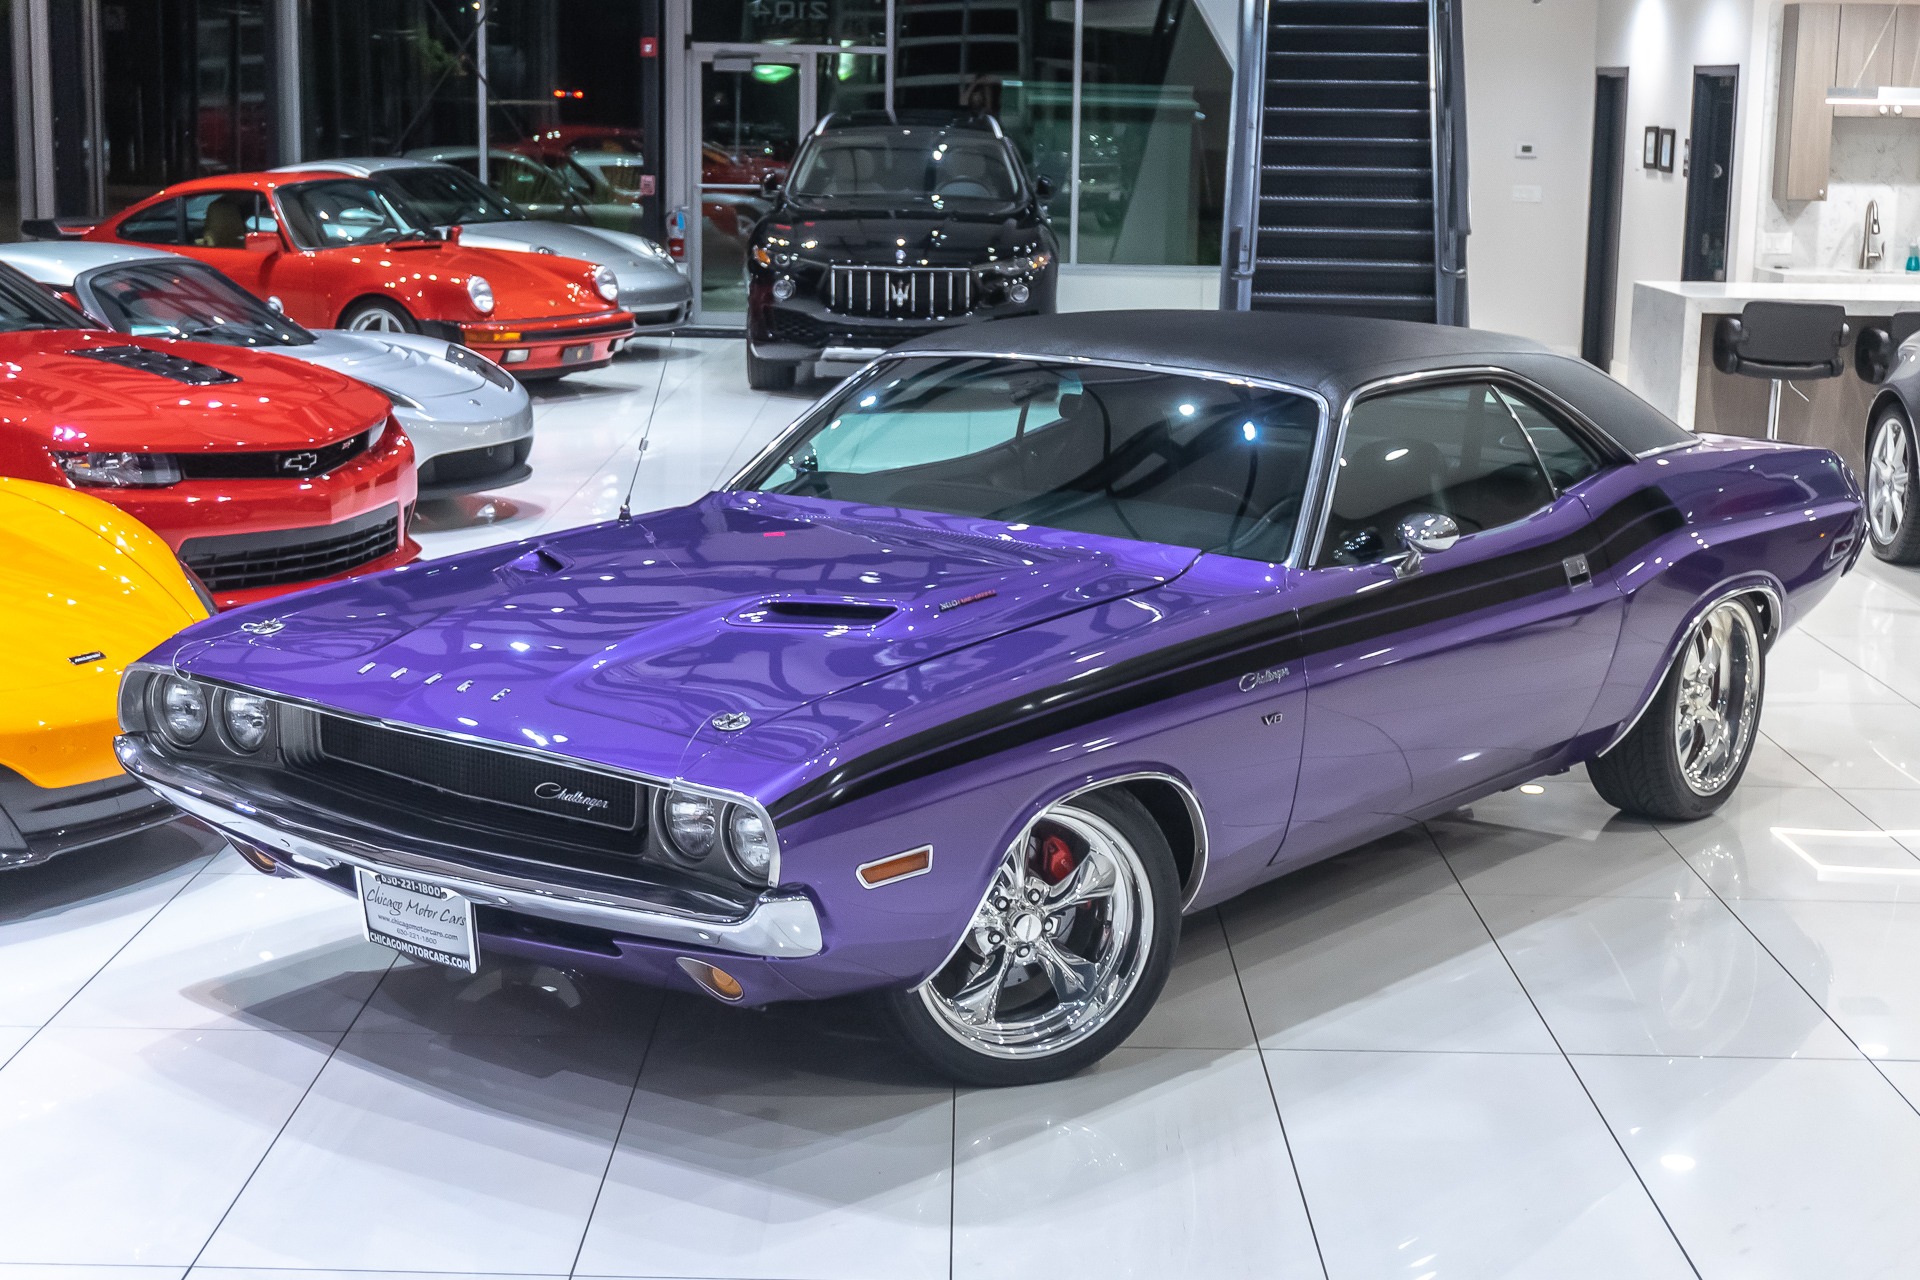 Used-1970-Dodge-Challenger-Coupe-360CI-FI-TECH-FUEL-INJECTED-RESTORED